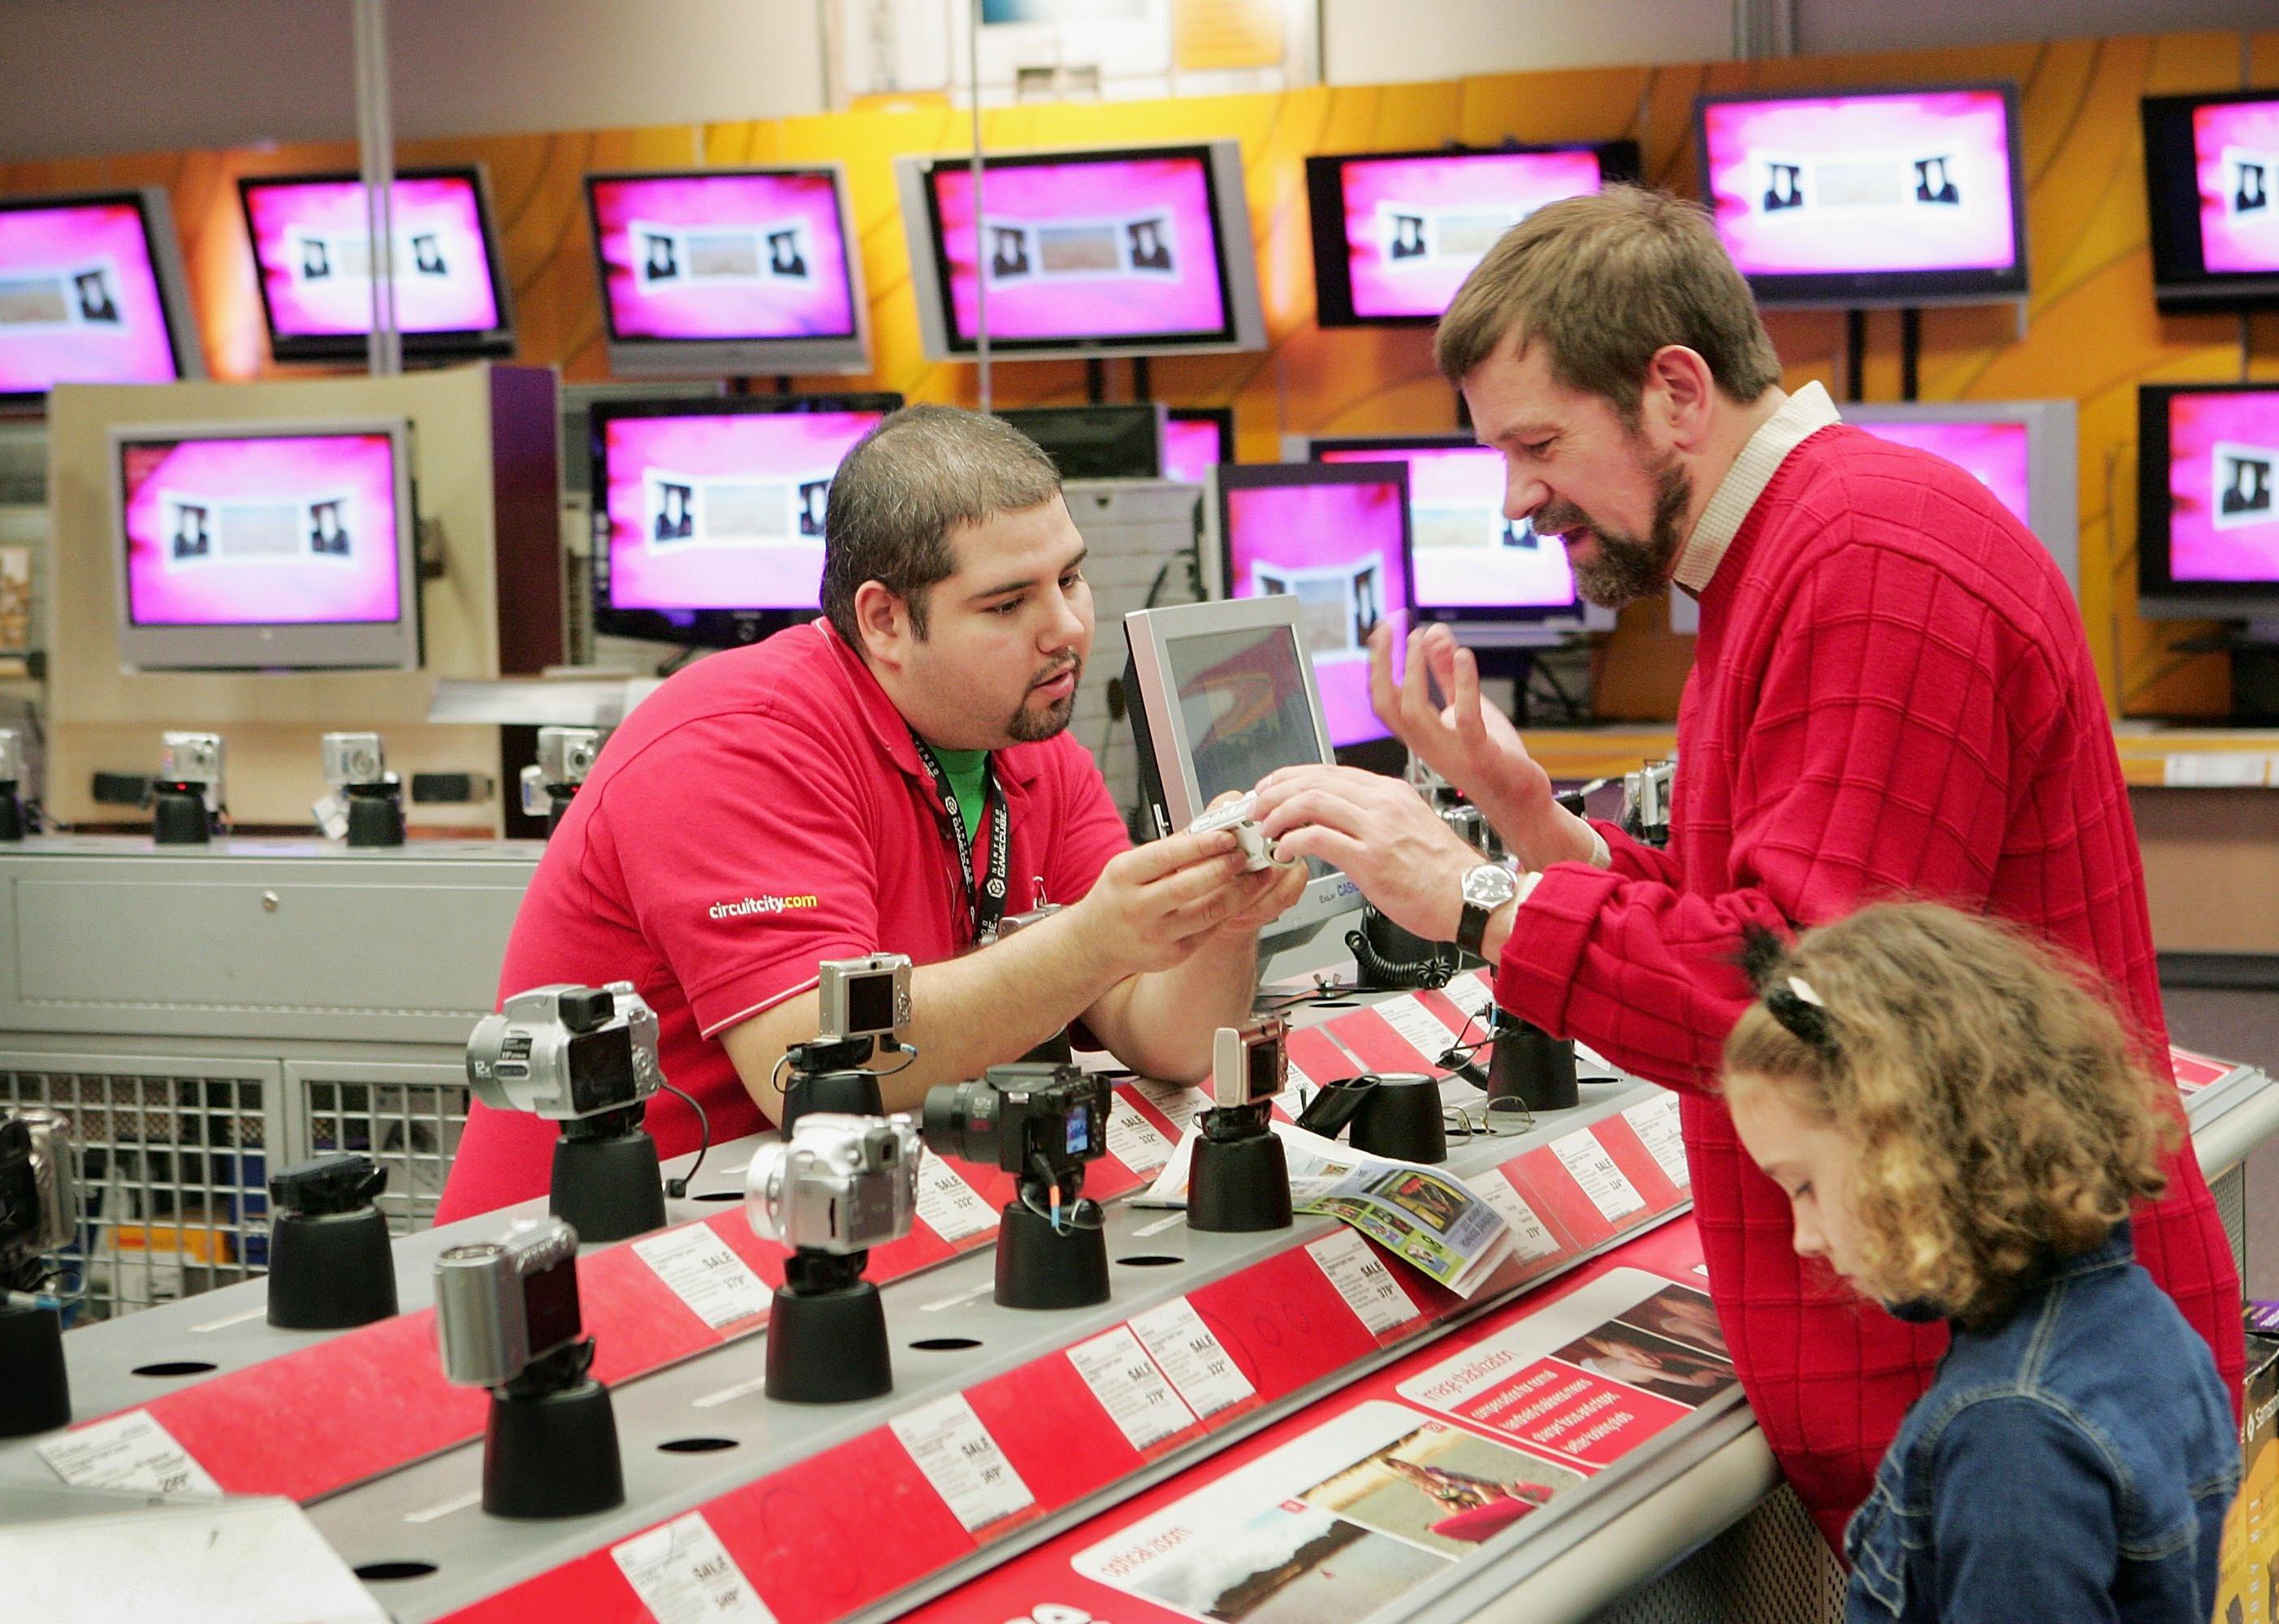 A Circuit City employee demonstrates a camera for a man and a little girl.